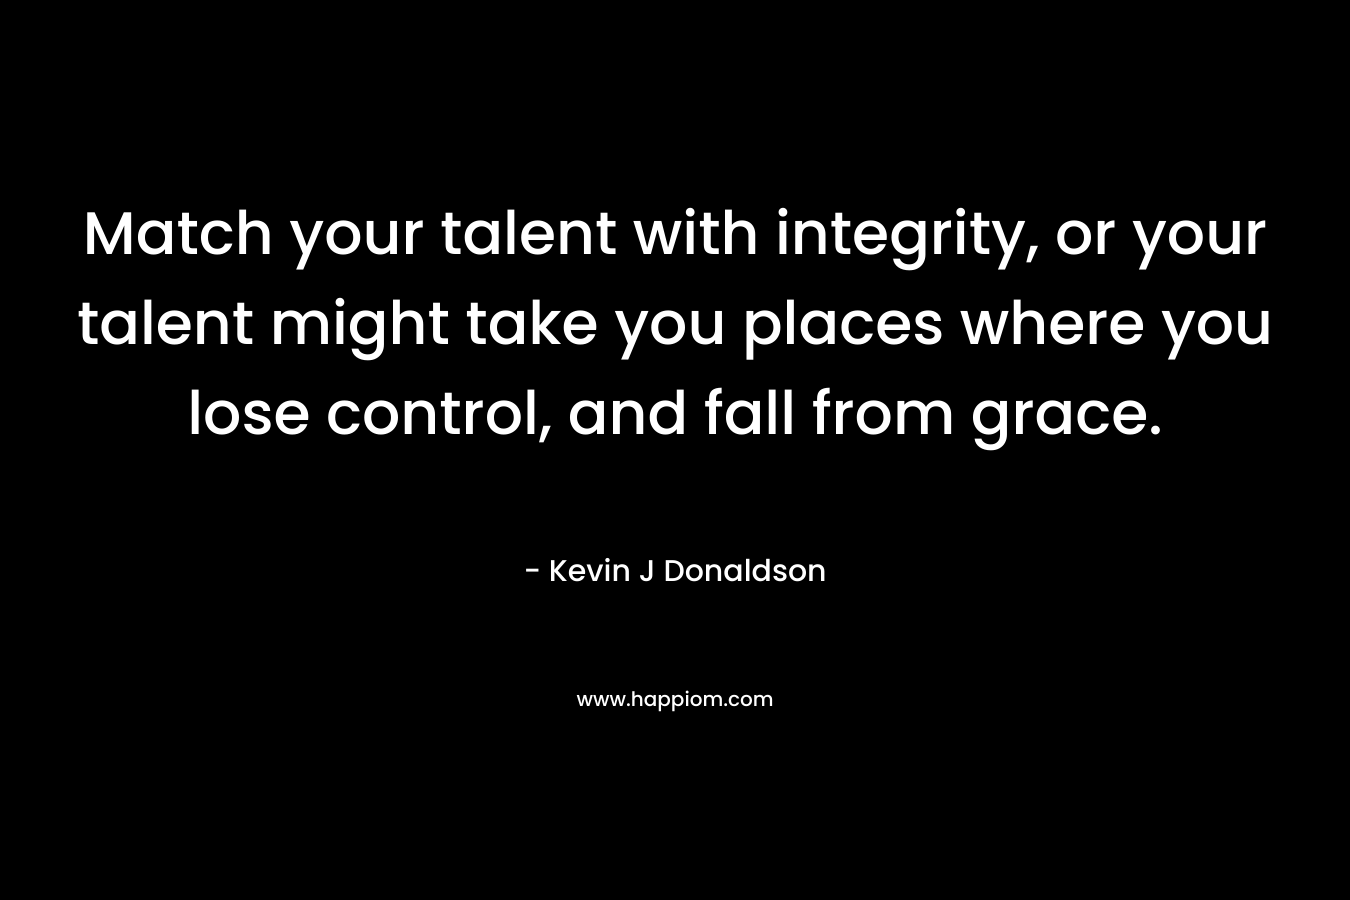 Match your talent with integrity, or your talent might take you places where you lose control, and fall from grace.